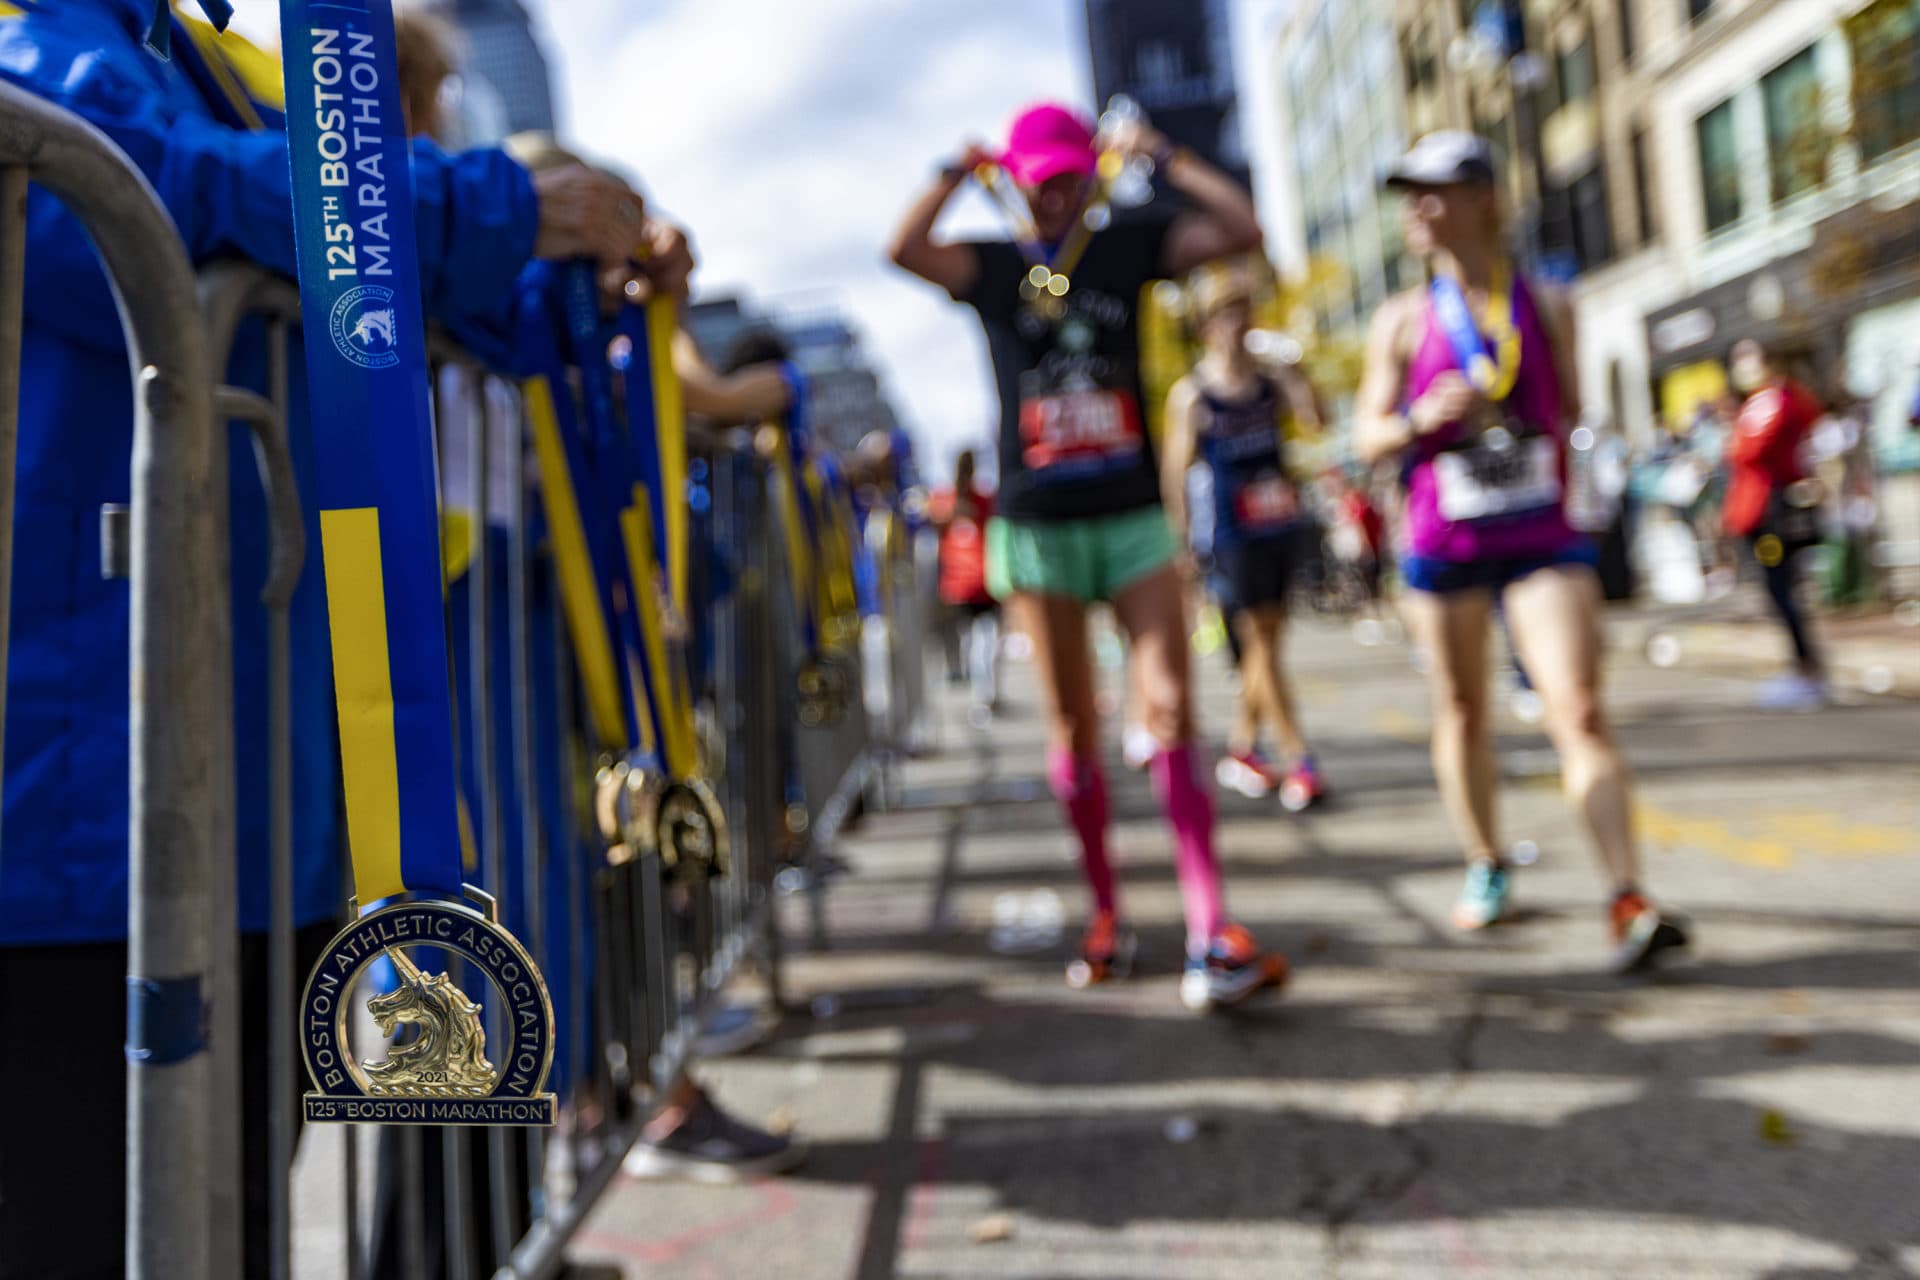 Boston Marathon participants receive their medals after they finished the grueling 26.2 mile course. (Jesse Costa/WBUR)